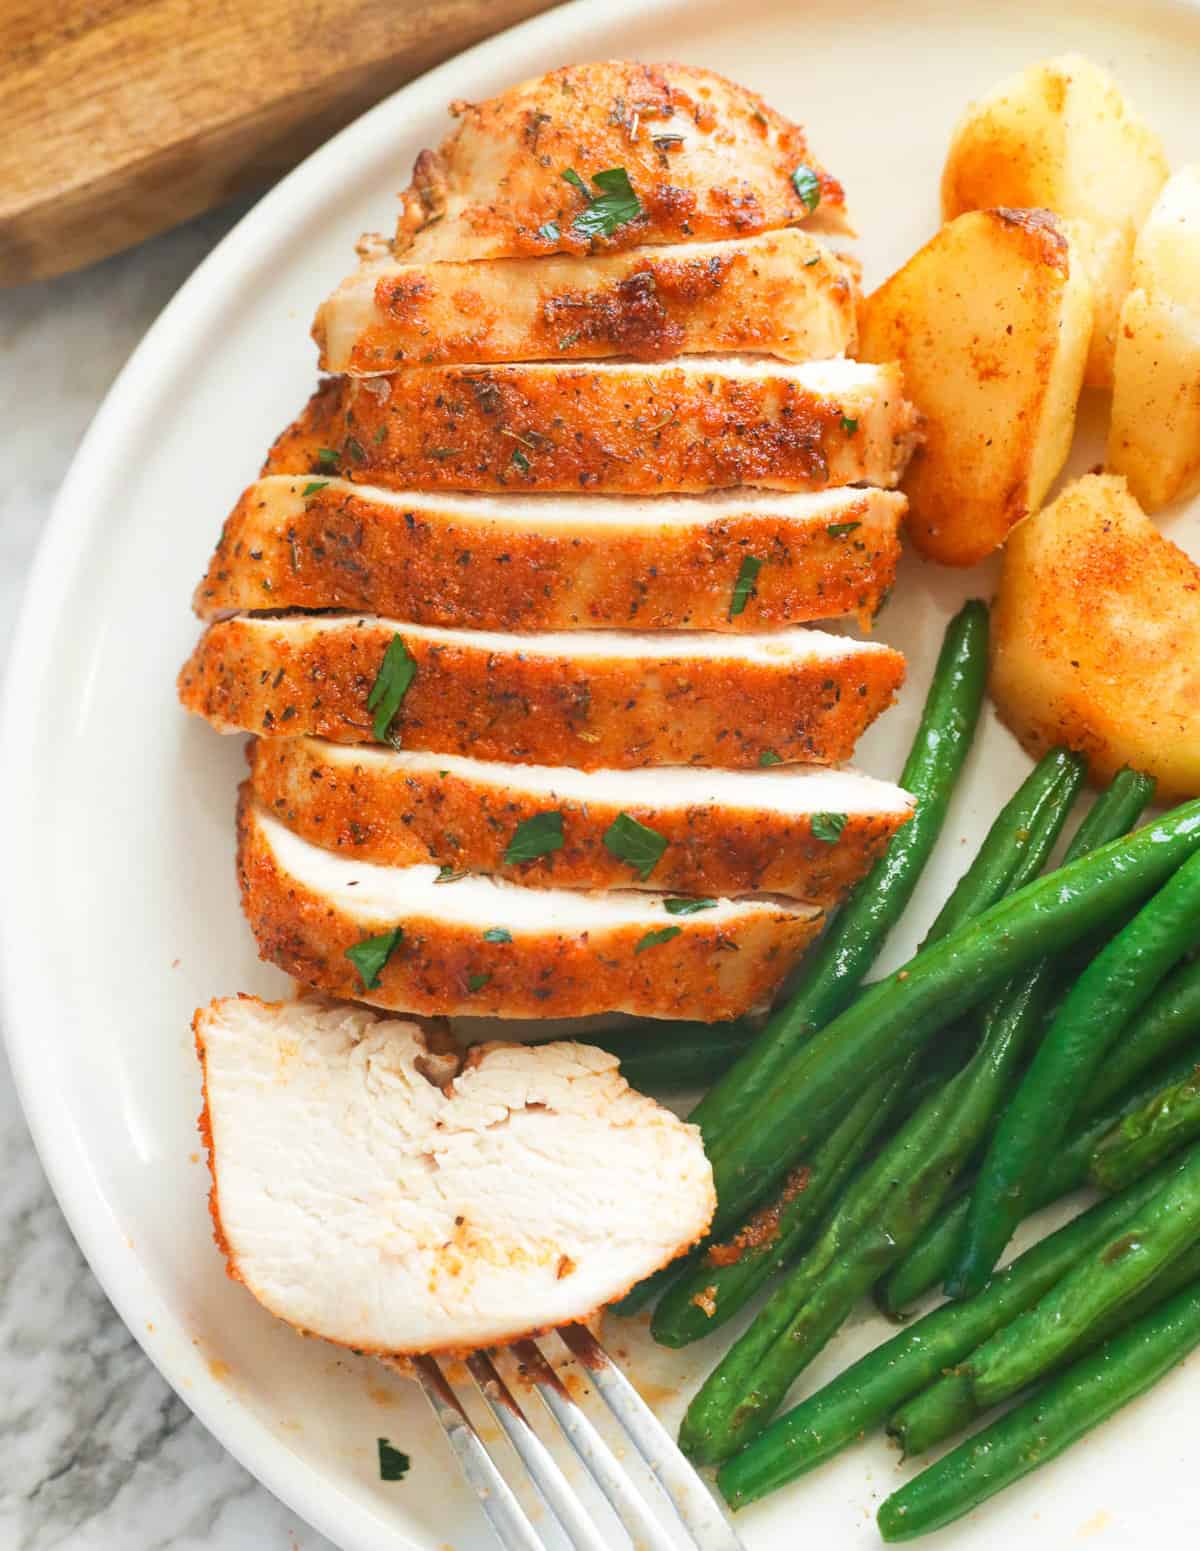 Enjoy baked chicken breasts with green beans and roasted potatoes